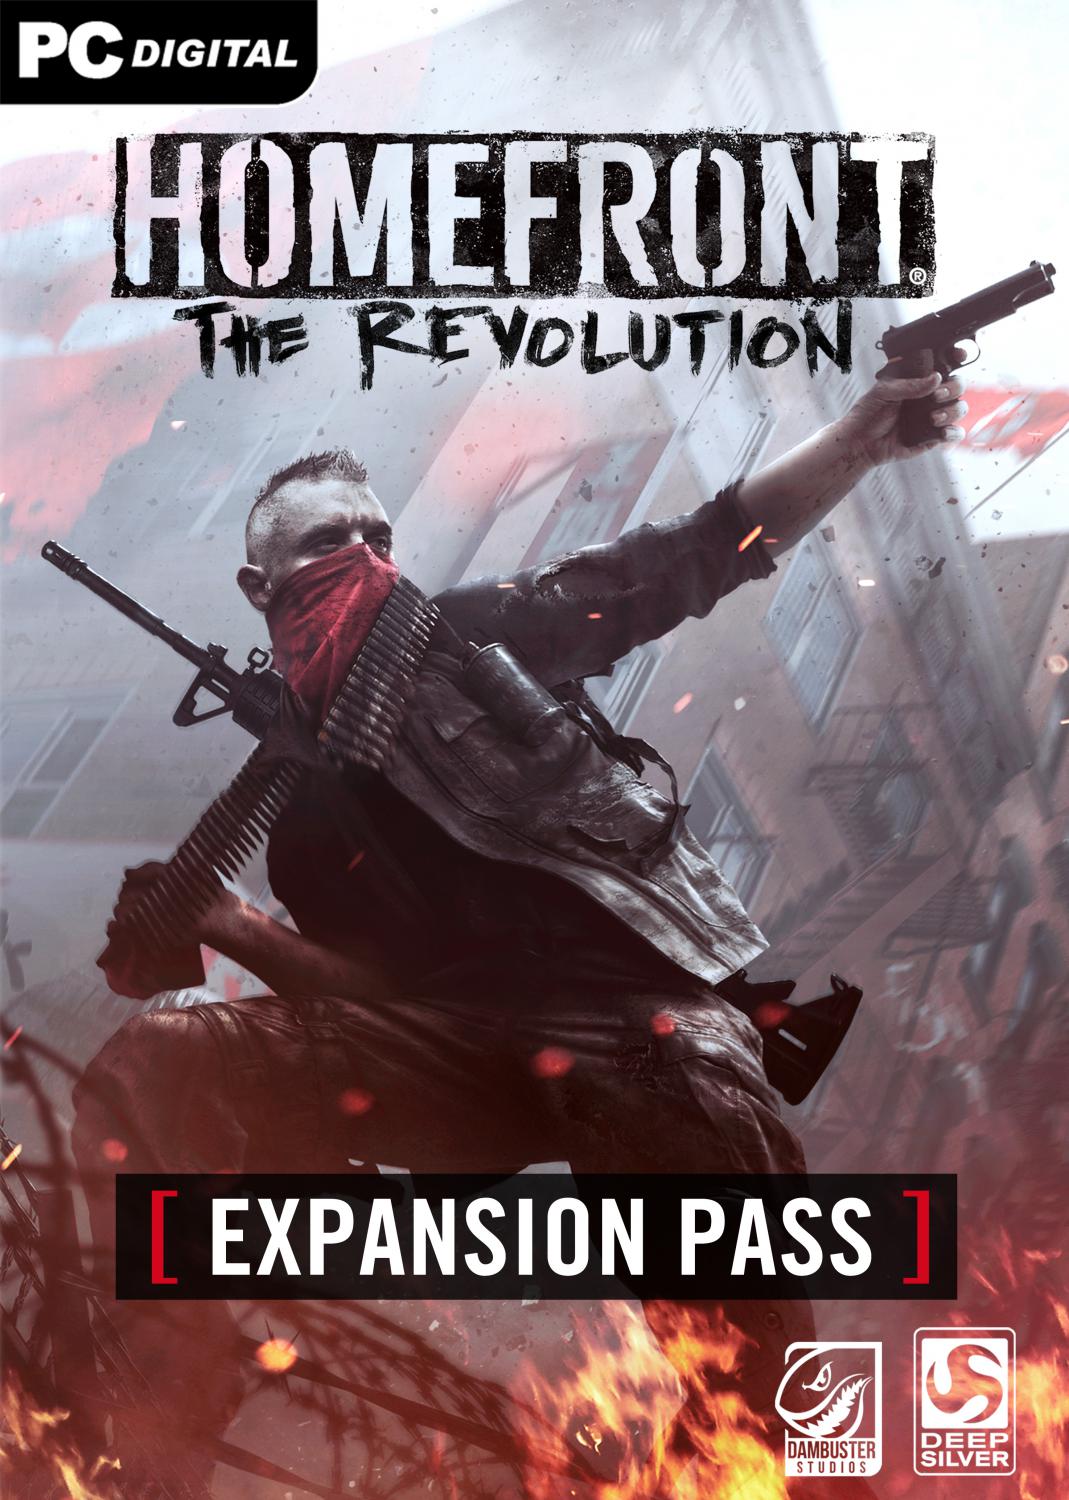 Video Game / Homefront